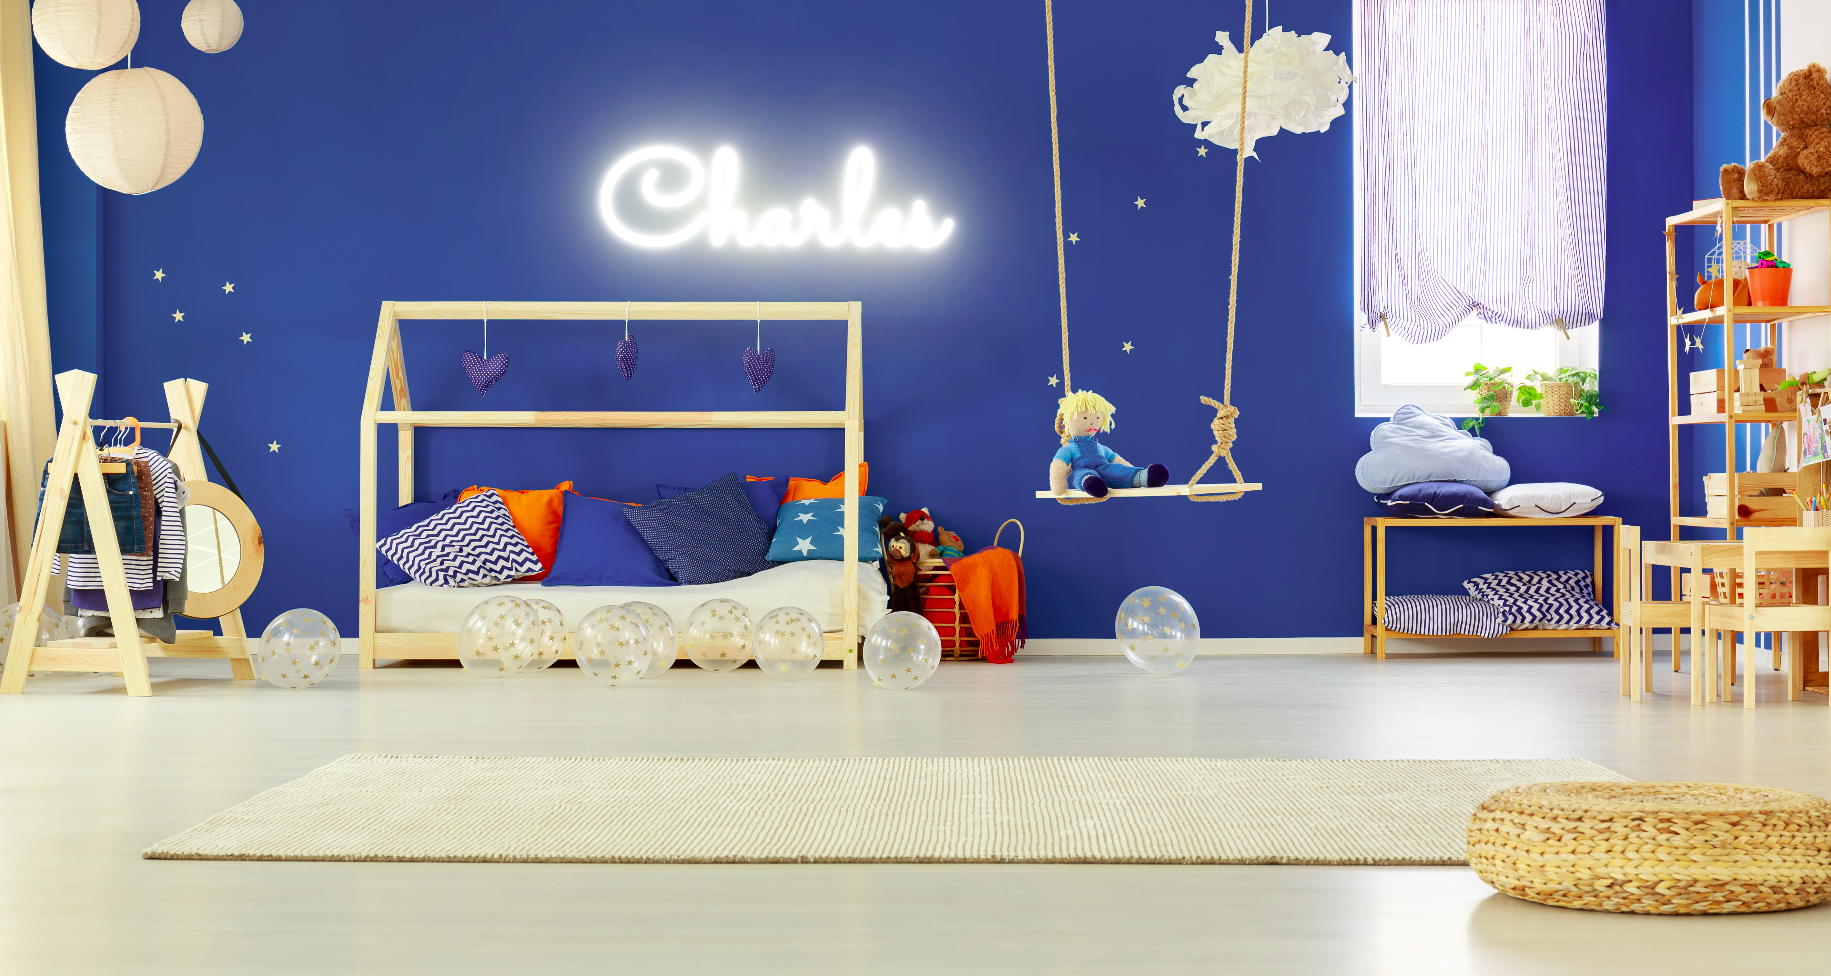 "Charles " Baby Name LED Neon Sign